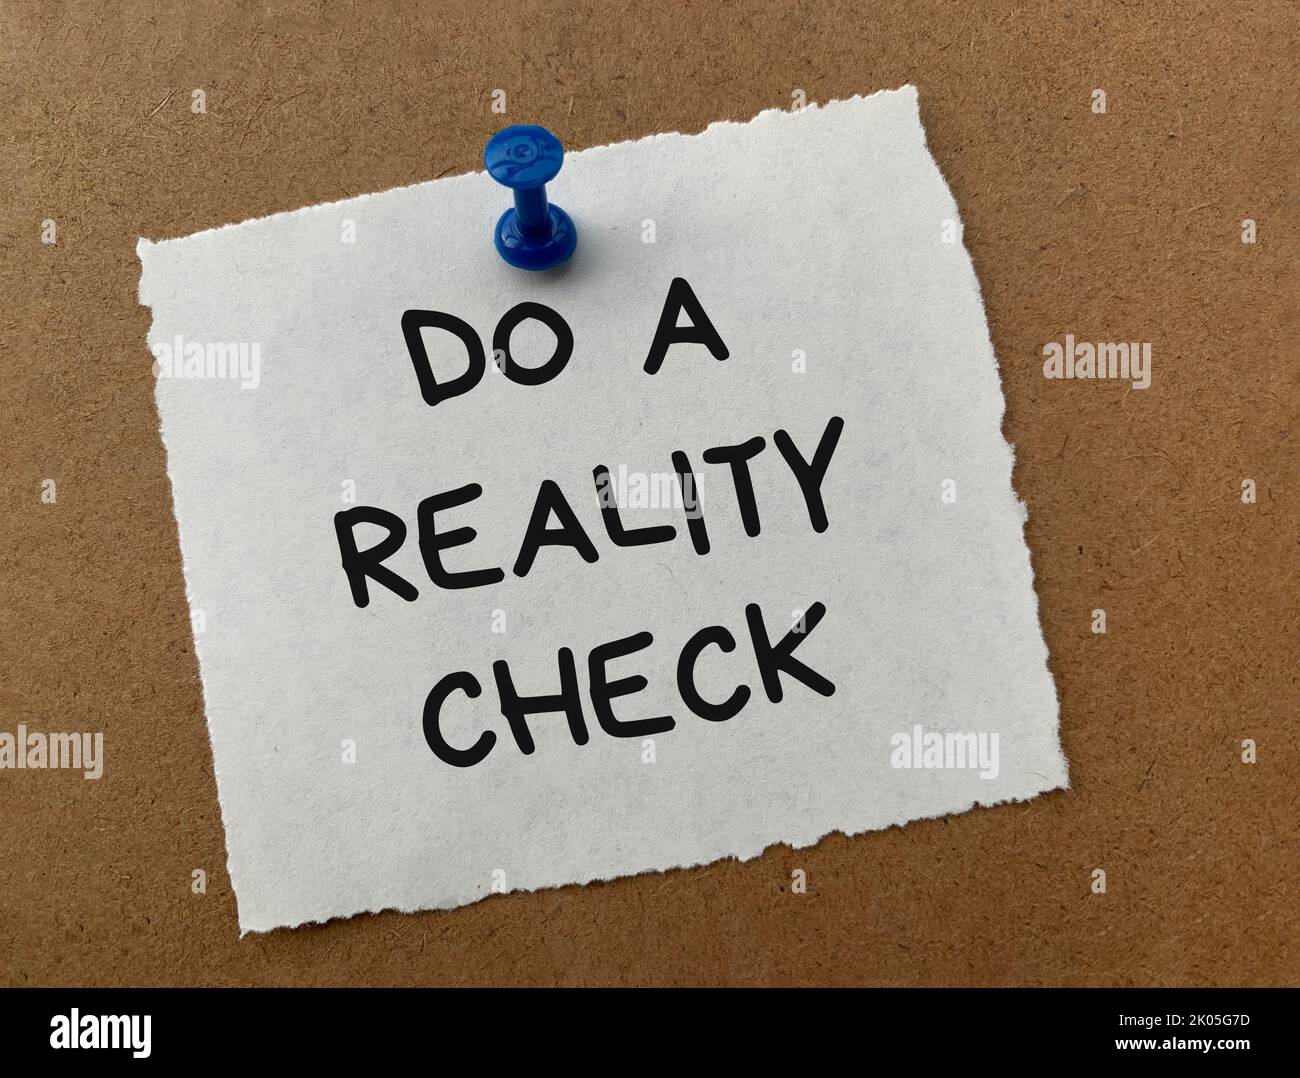 Do a reality check text on white notepad with wooden background. Reality check concept. Stock Photo